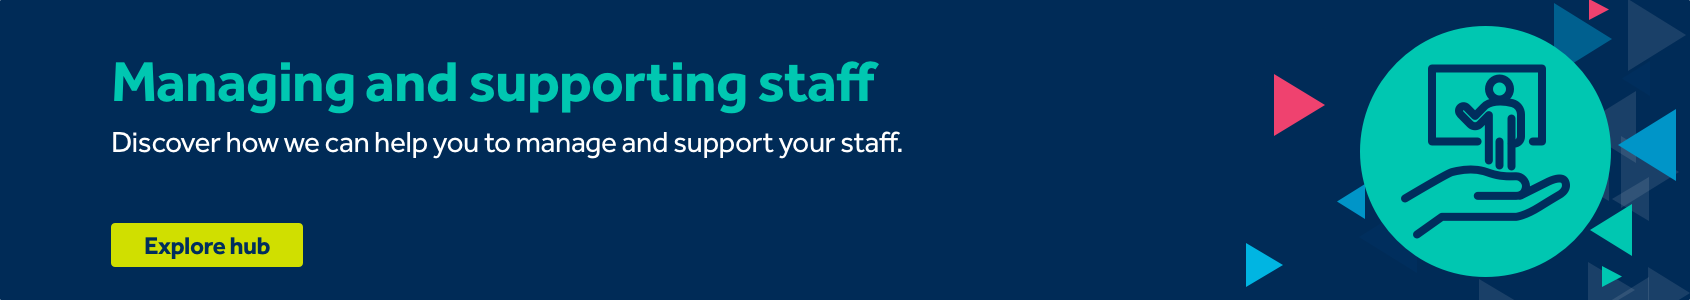 Managing and supporting staff